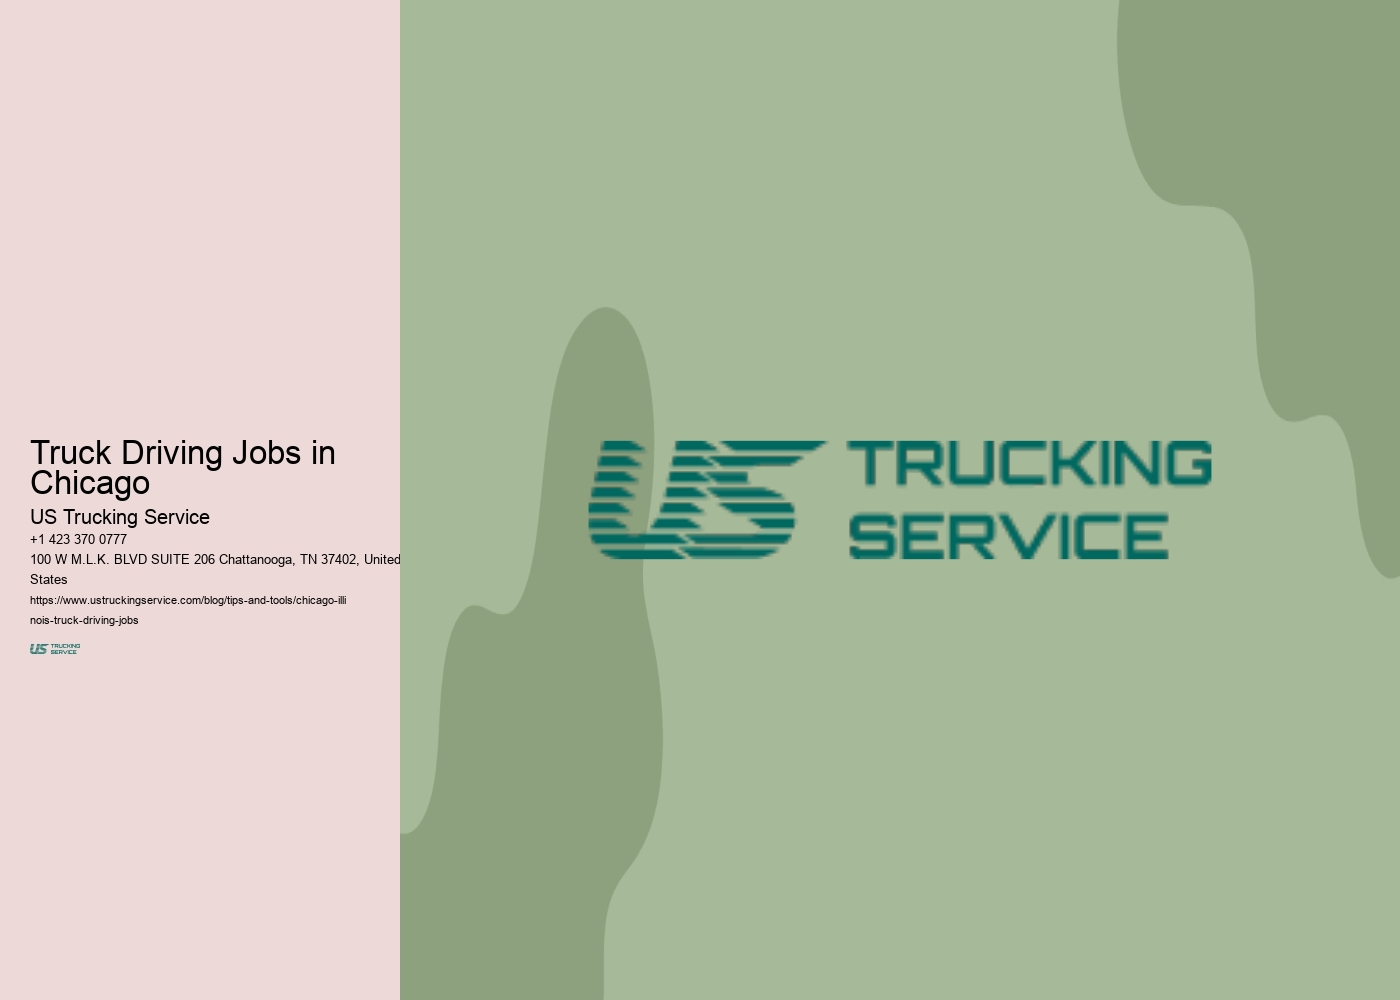 Truck Driving Jobs in Chicago